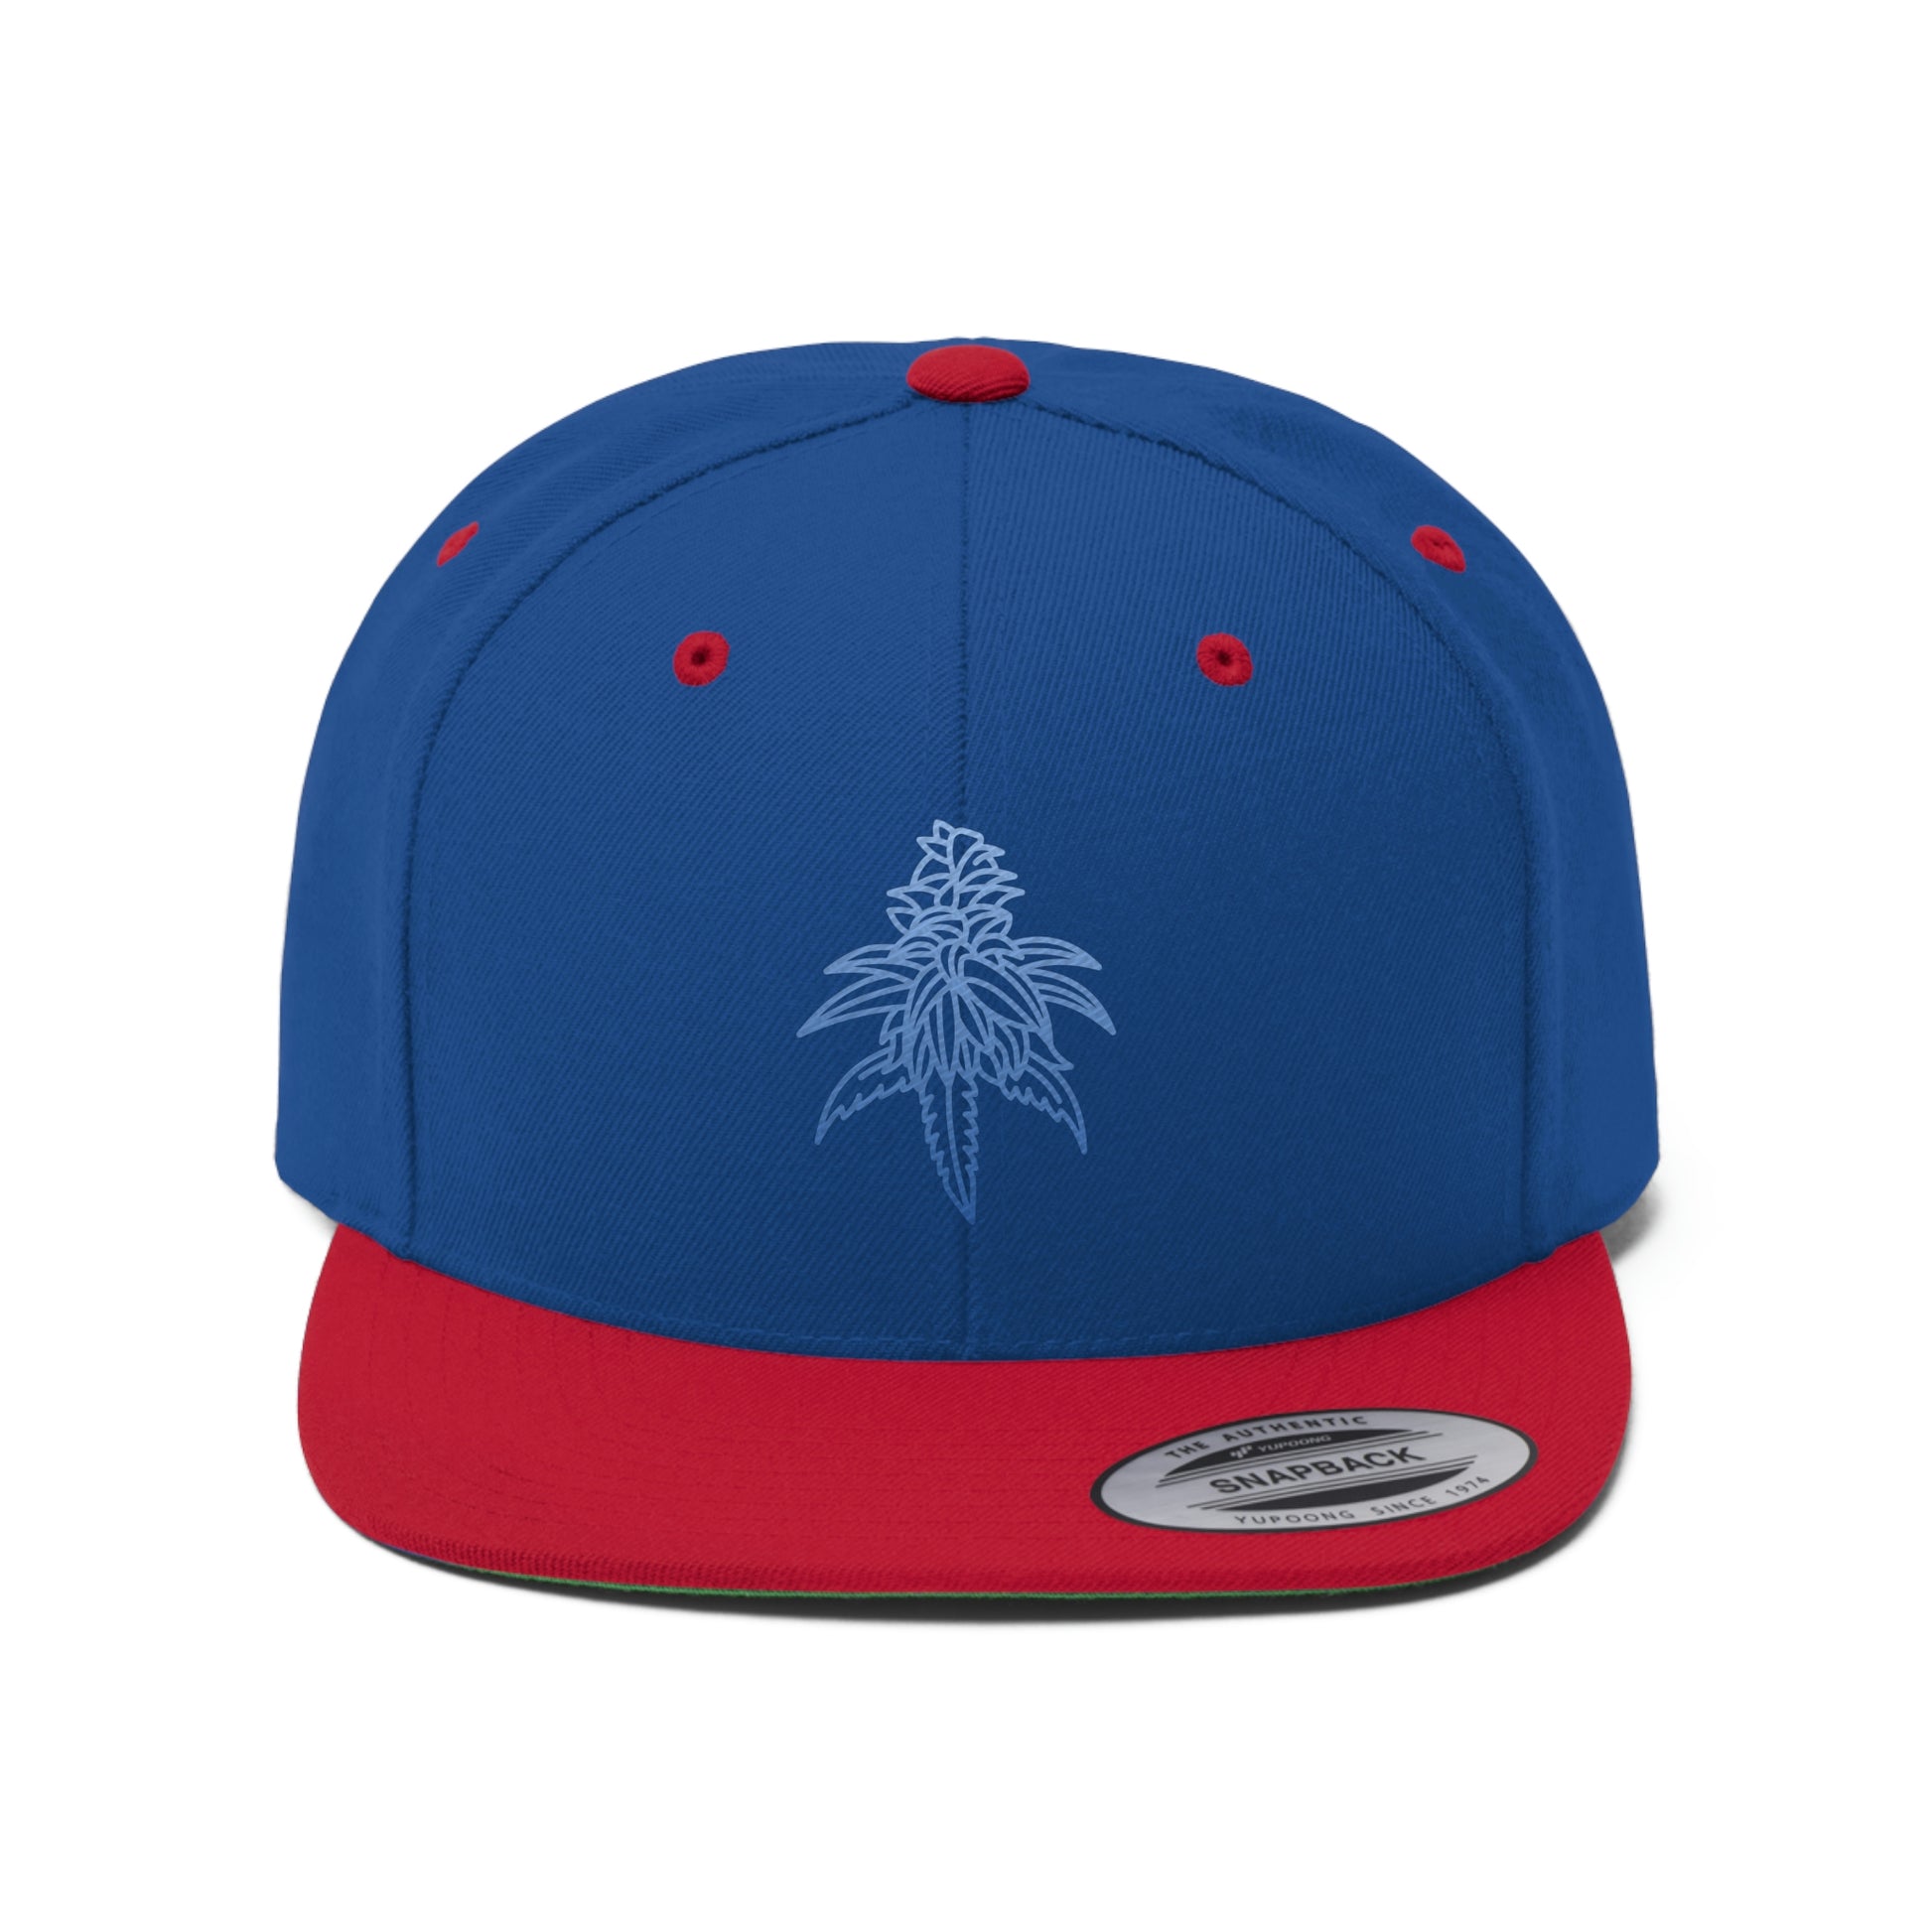 Blue Dream Snapback Hat in the red and blue color scheme with the picture of blue dream on the front center in blue